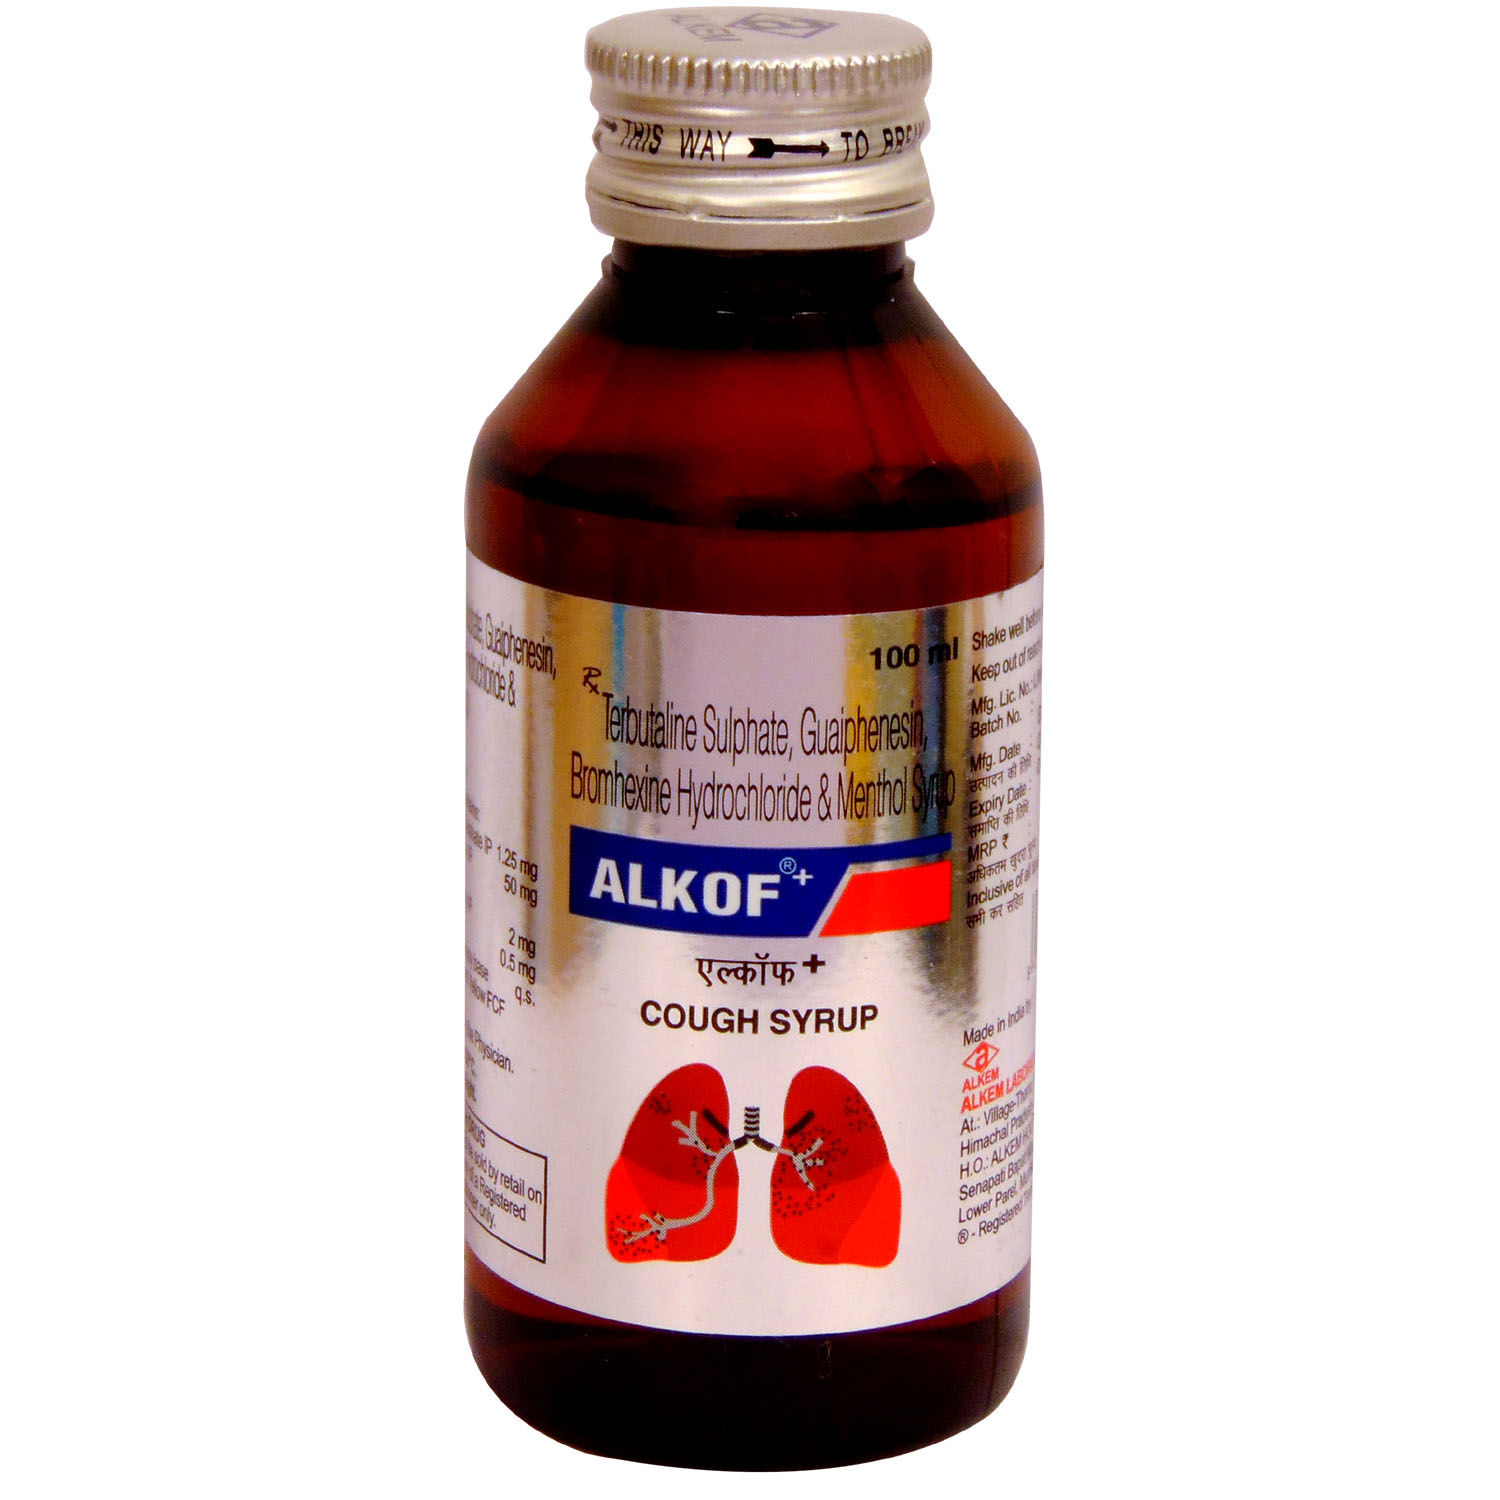 Buy Alkof Plus Cough Syrup 100 ml Online